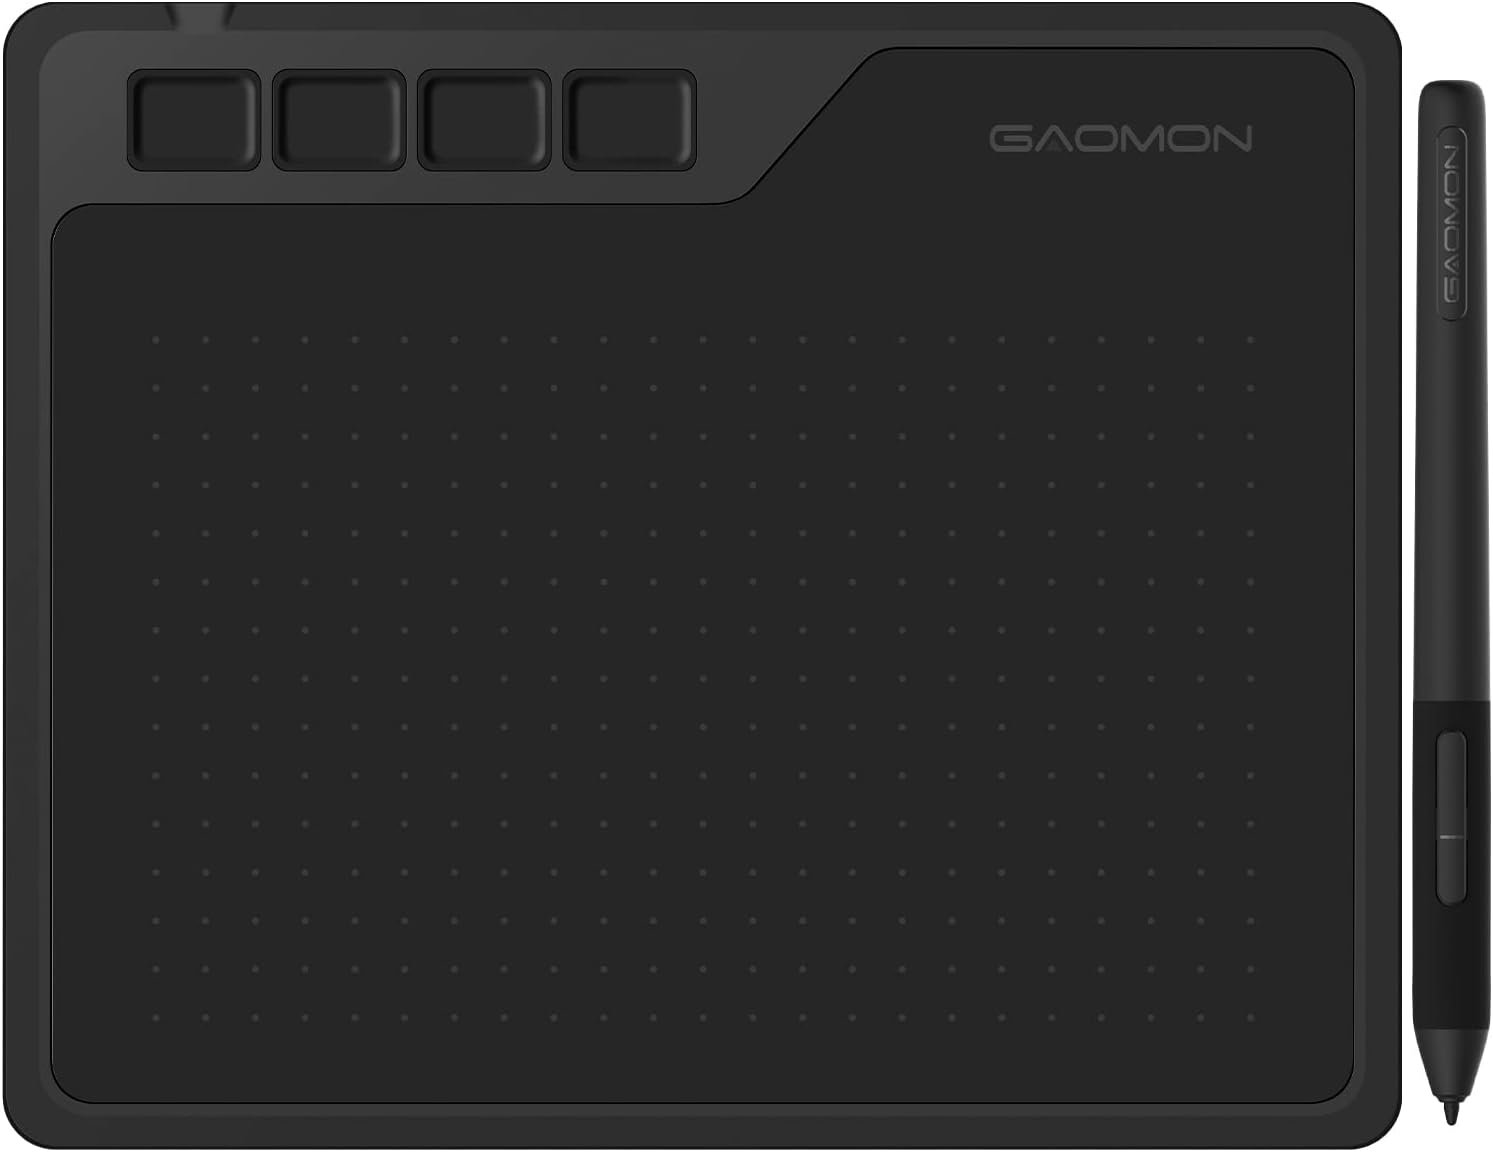 Gaomon S620 Drawing Tablet 6.5 X 4 Inch Graphics Tablet With 8192 Passive Pen 4 Customizable Expresskeys For Digital Drawing  Osu  Online Teaching-For Mac Windows Android Os